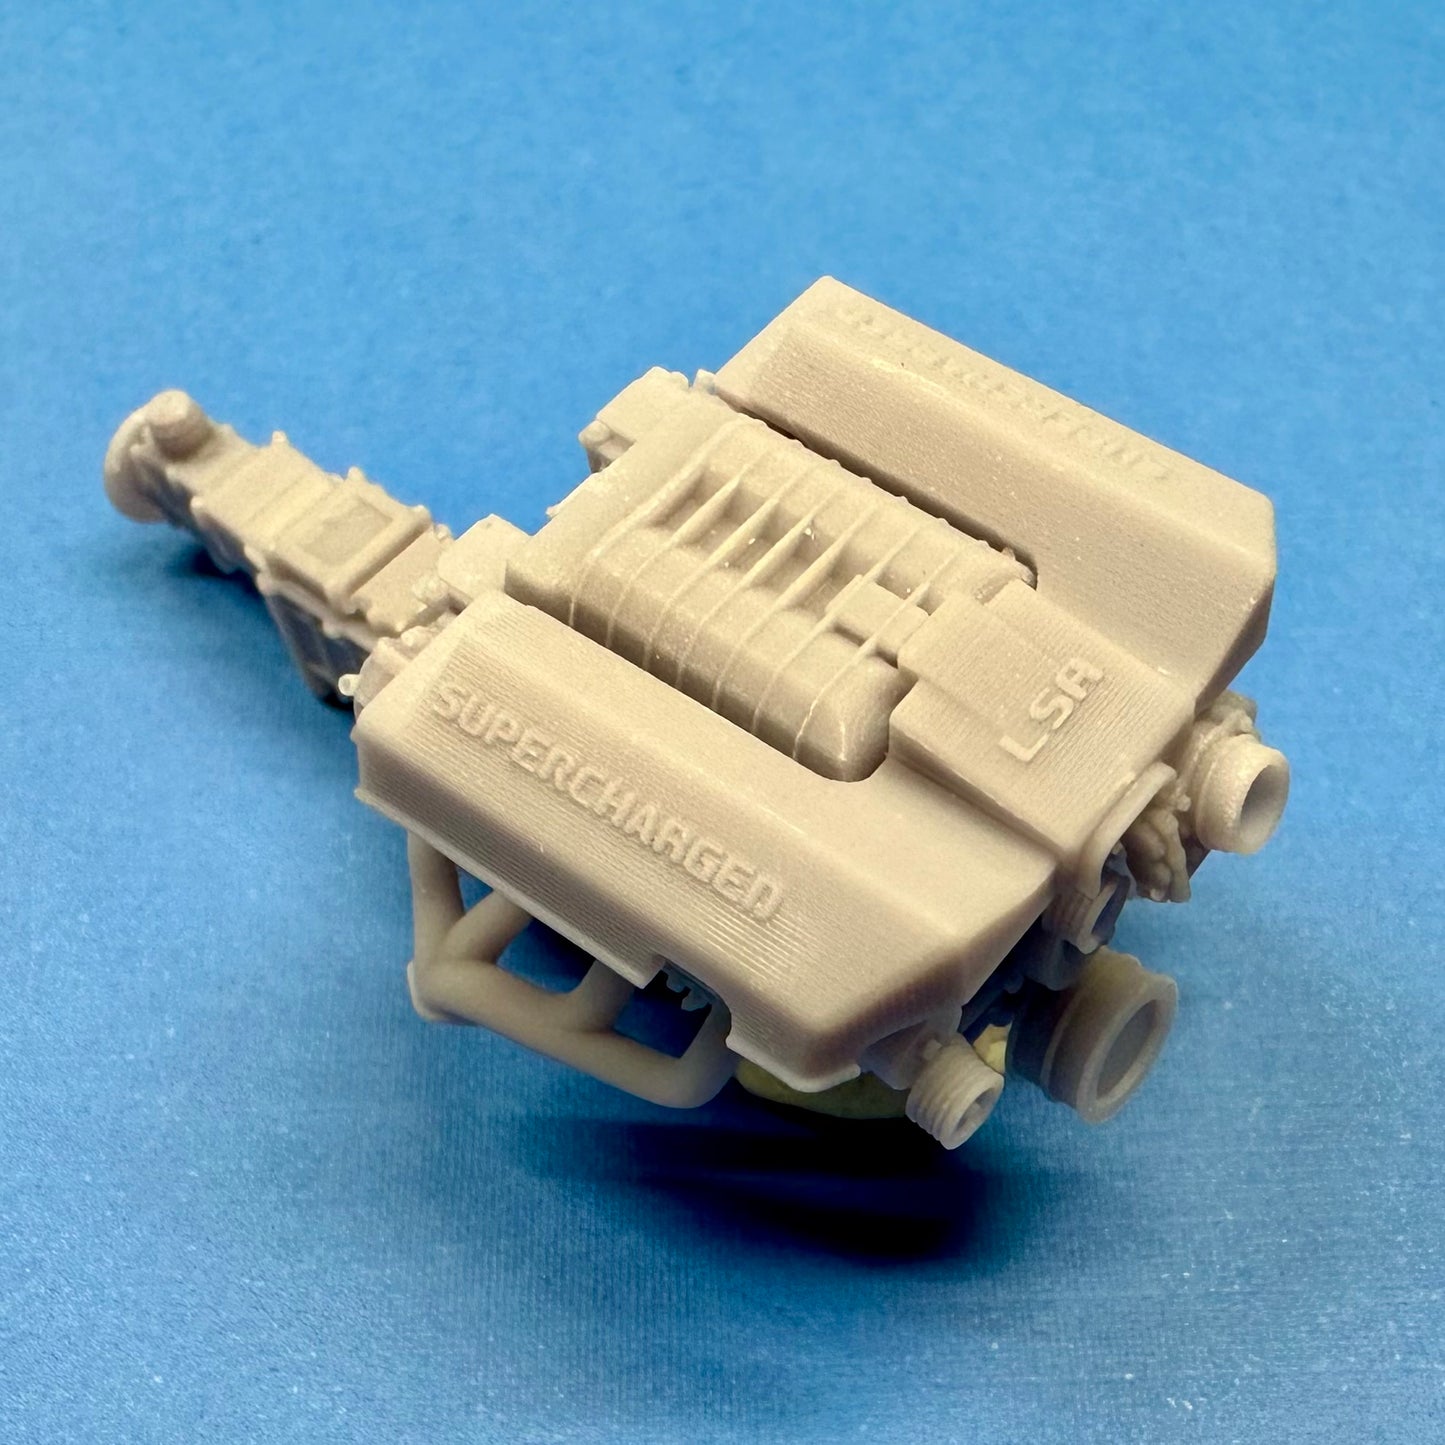 LSA Supercharged Chevy Engine 1/24 1/25